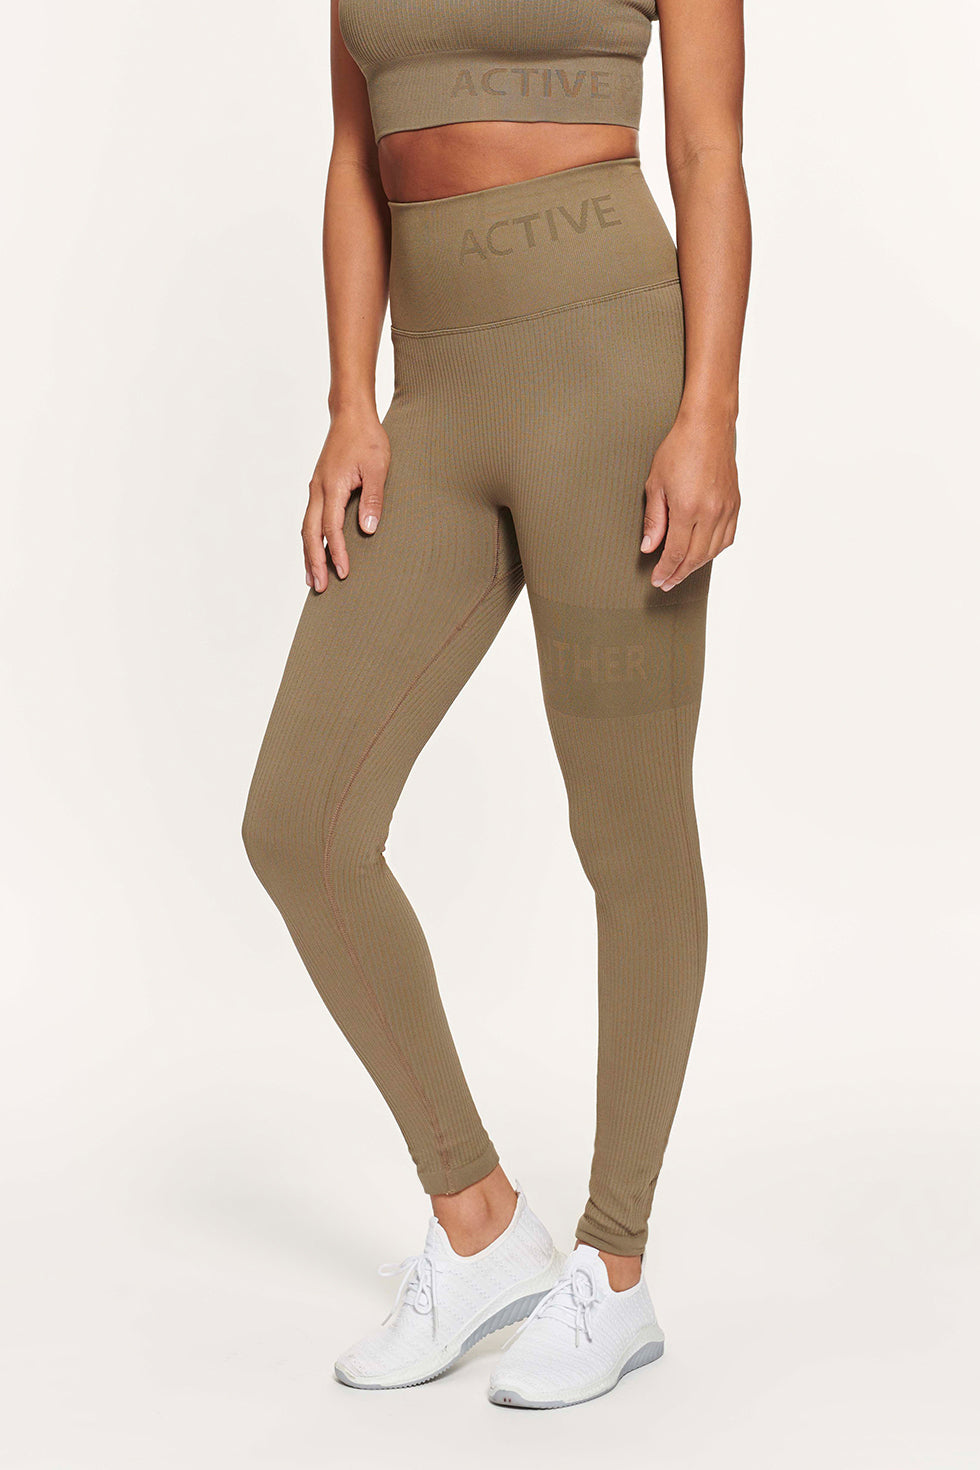 Active Panther - Taupe - GOGO Legging